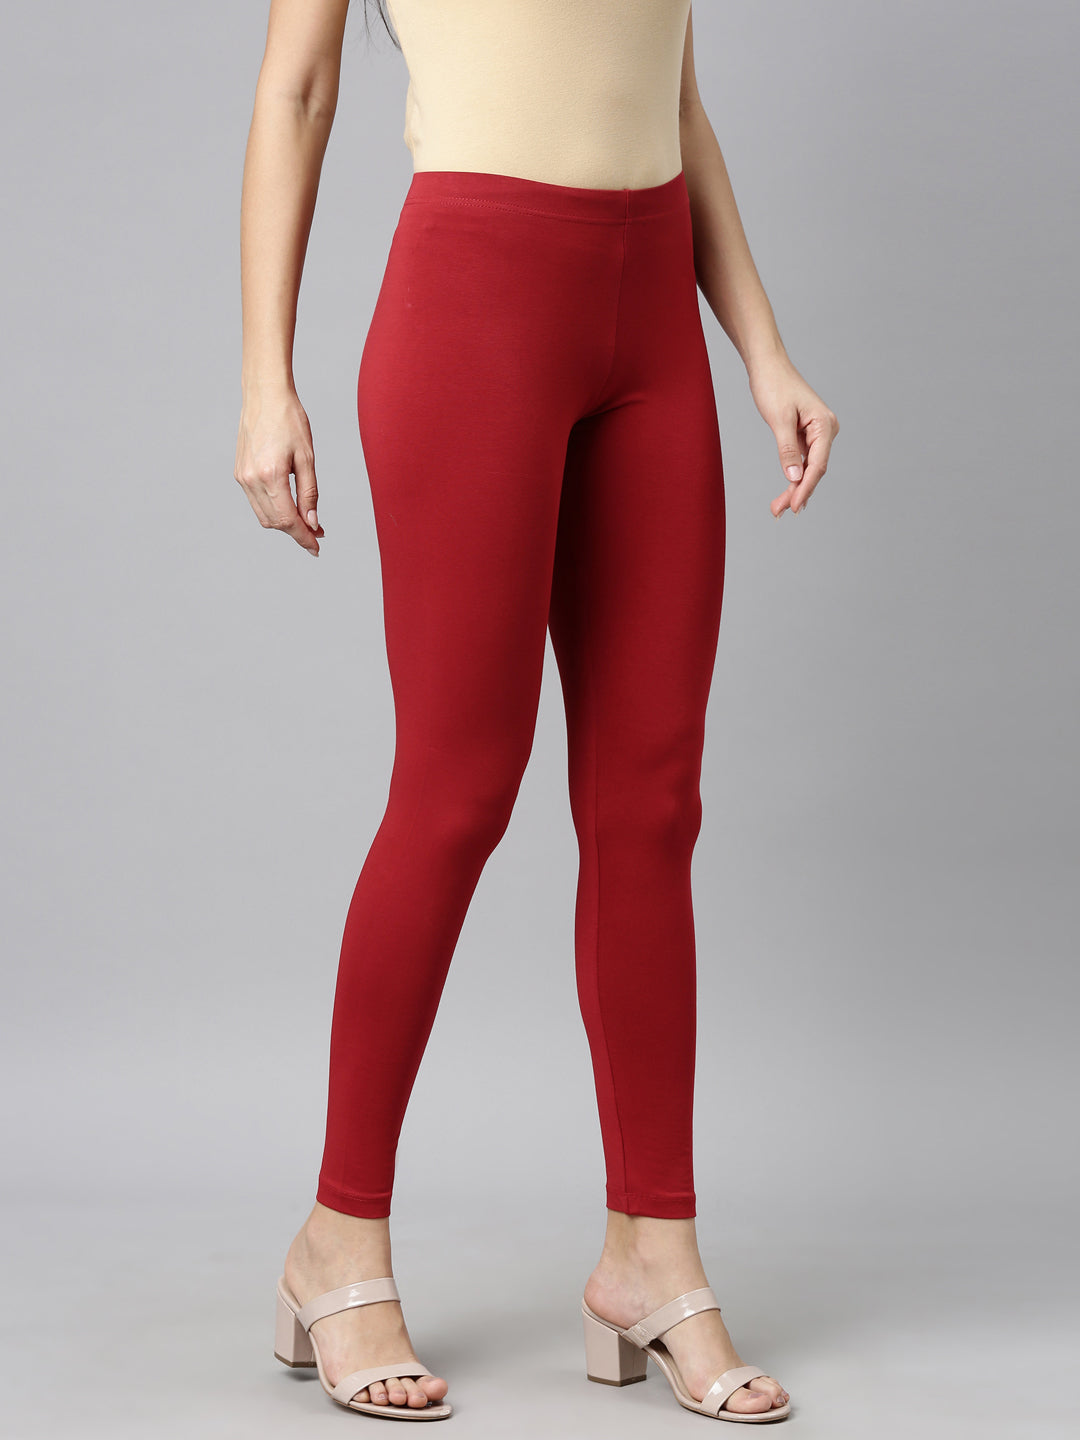 Women Solid Cherry Mid Rise Slim Fit Ankle Length Leggings - Tall